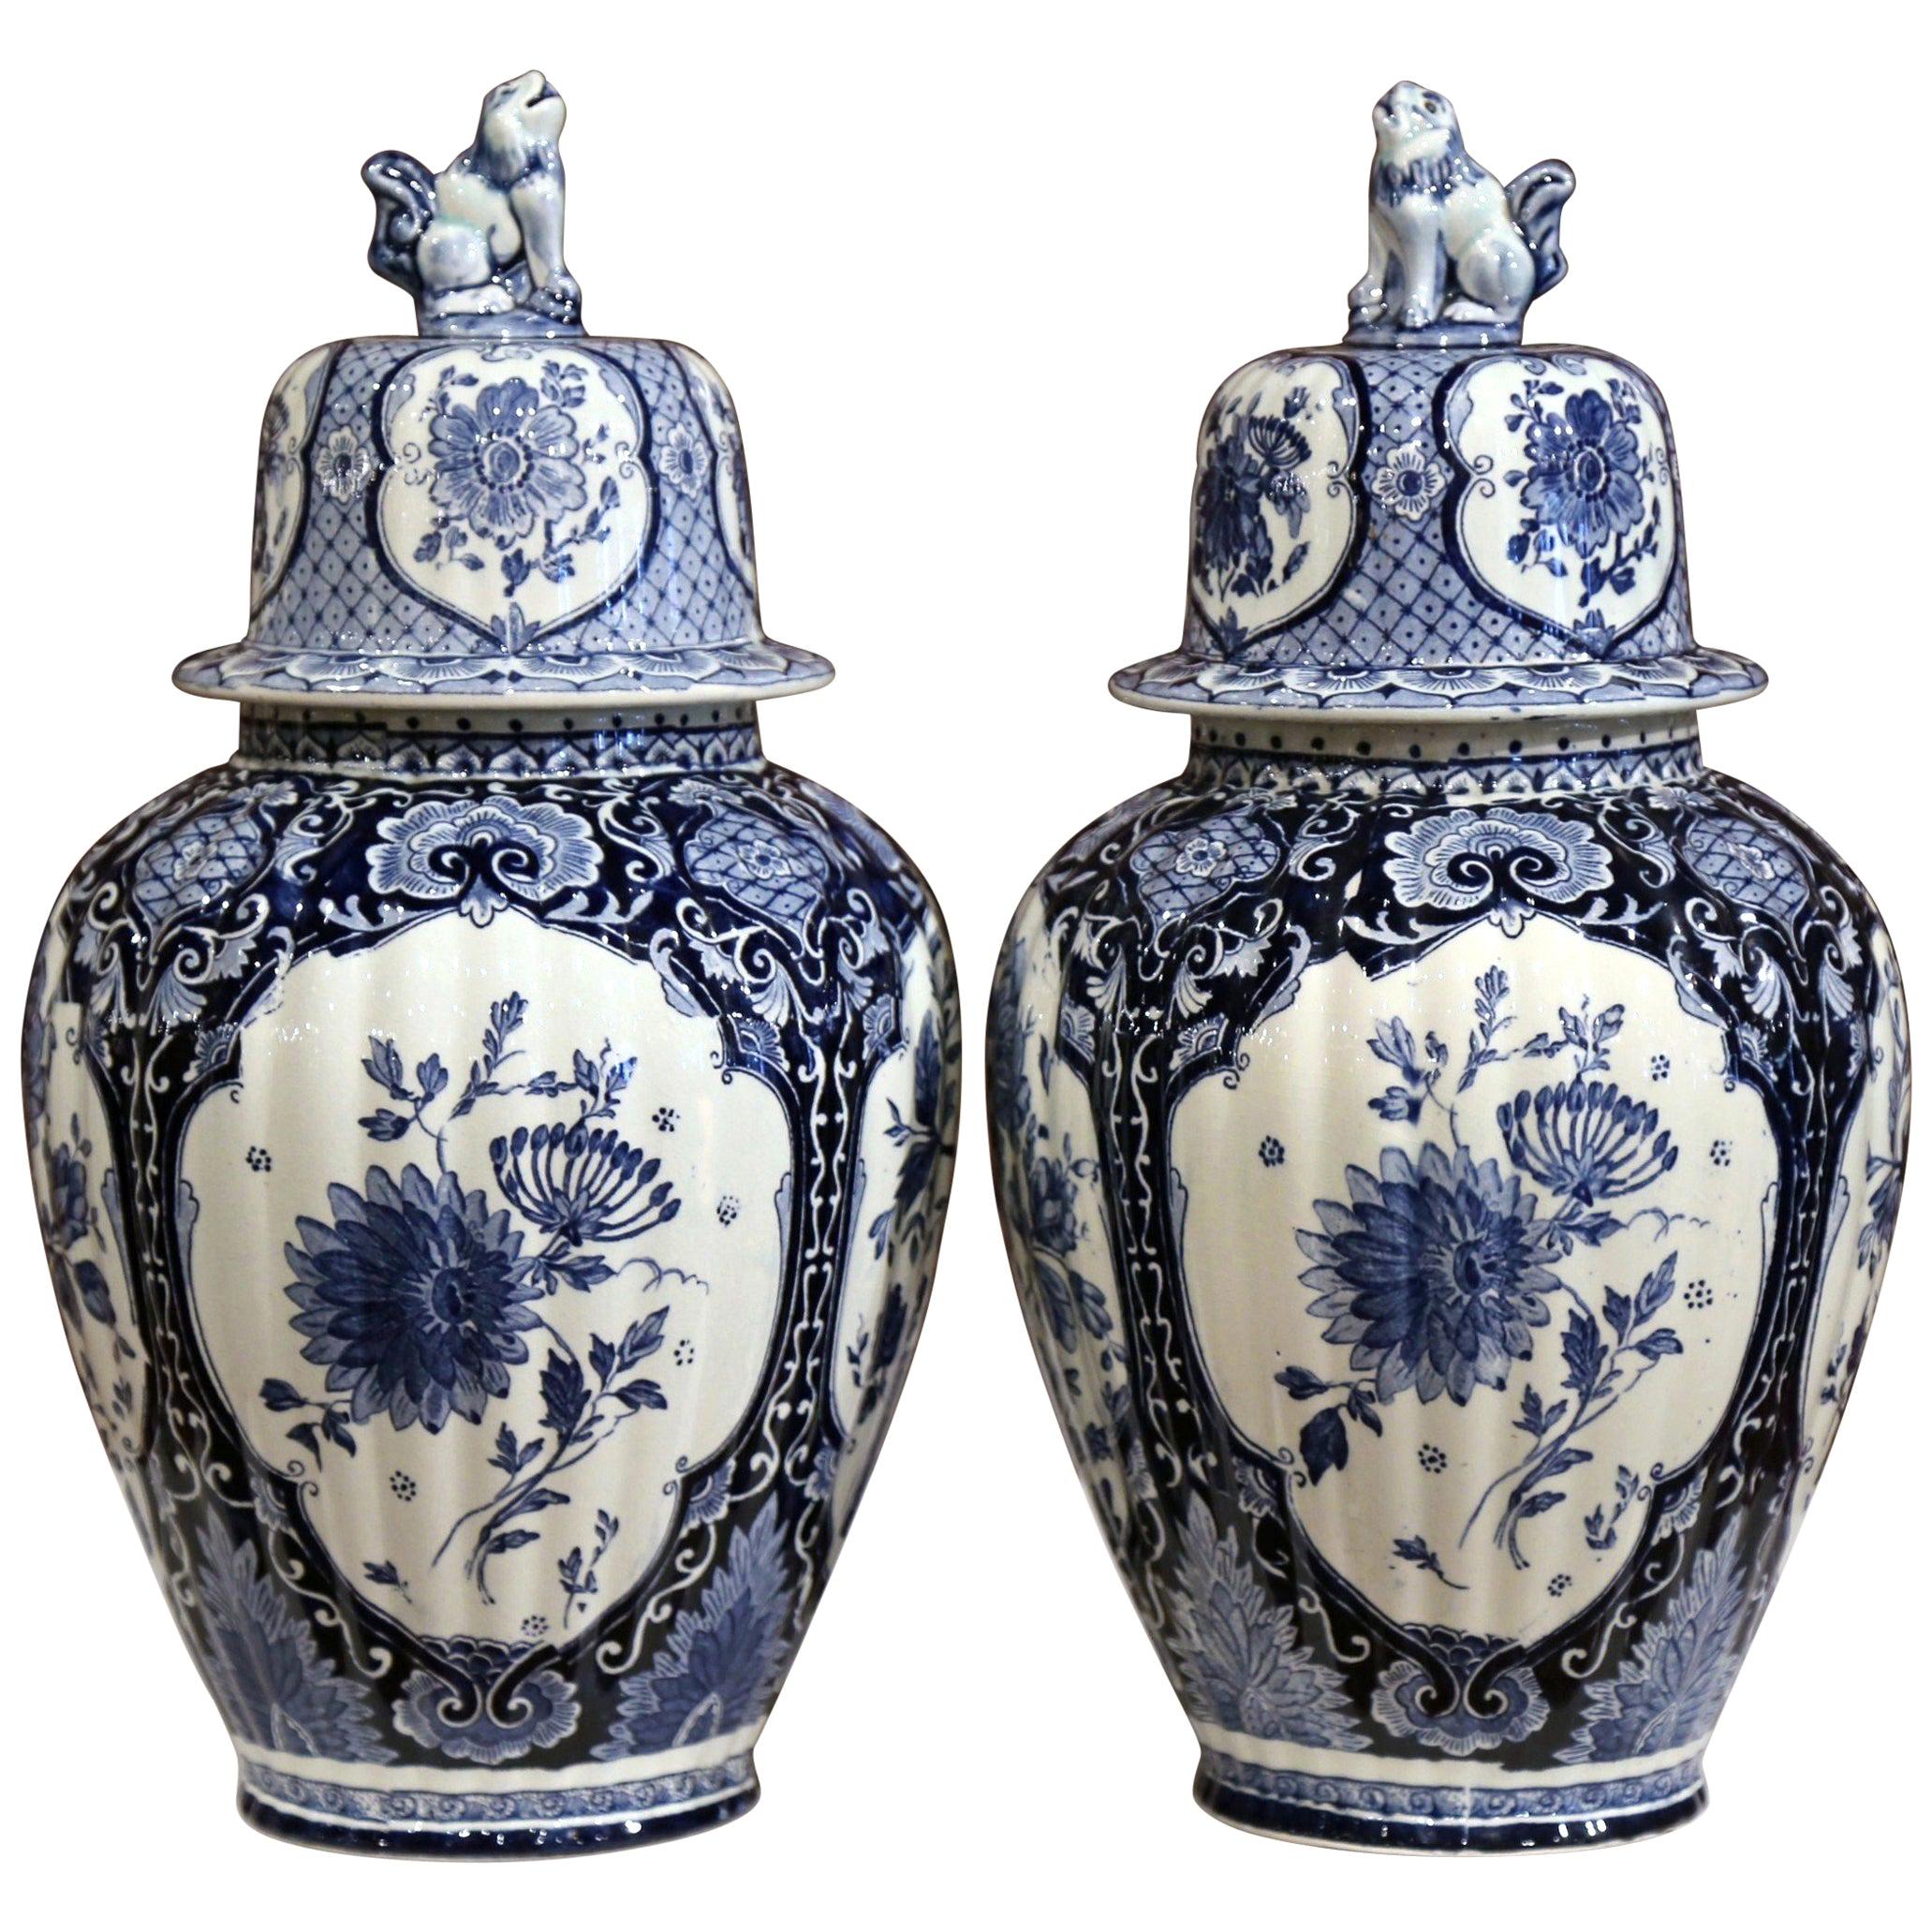 Pair of 20th Century Dutch Painted Blue and White Faience Delft Ginger Jars